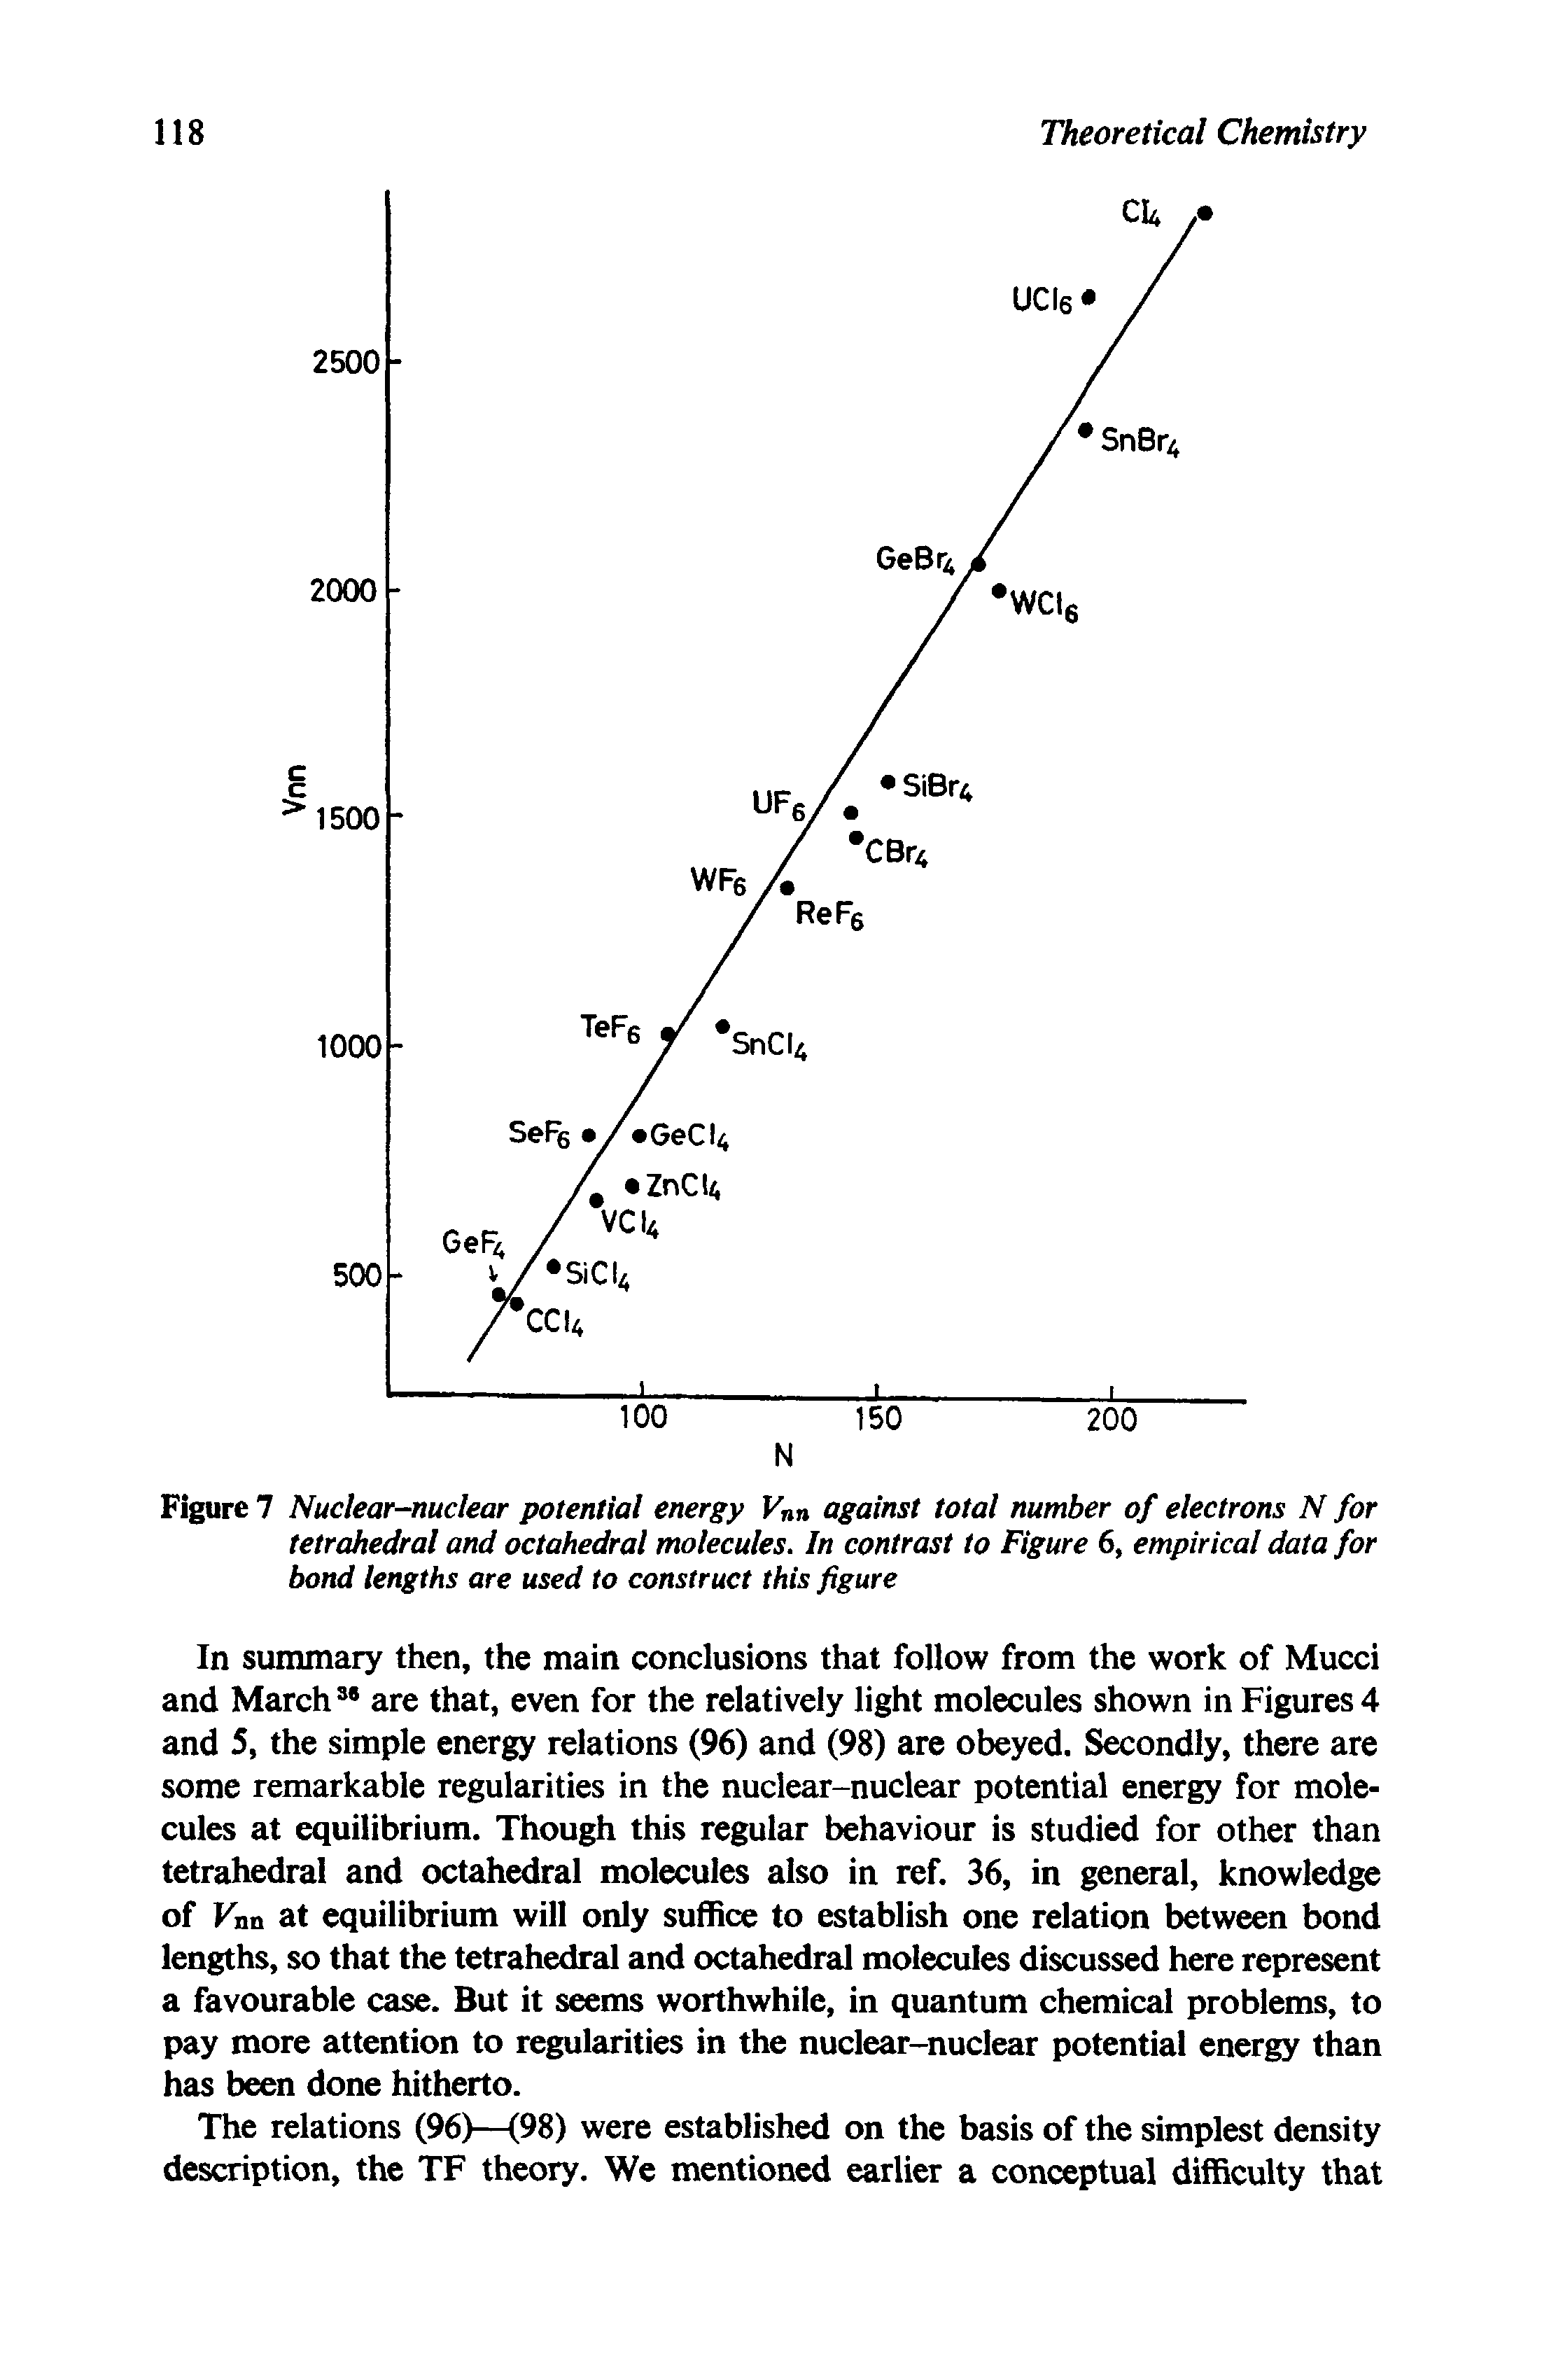 Figure 7 Nuclear-nuclear potential energy Vnn against total number of electrons N for tetrahedral and octahedral molecules. In contrast to Figure 6, empirical data for bond lengths are used to construct this figure...